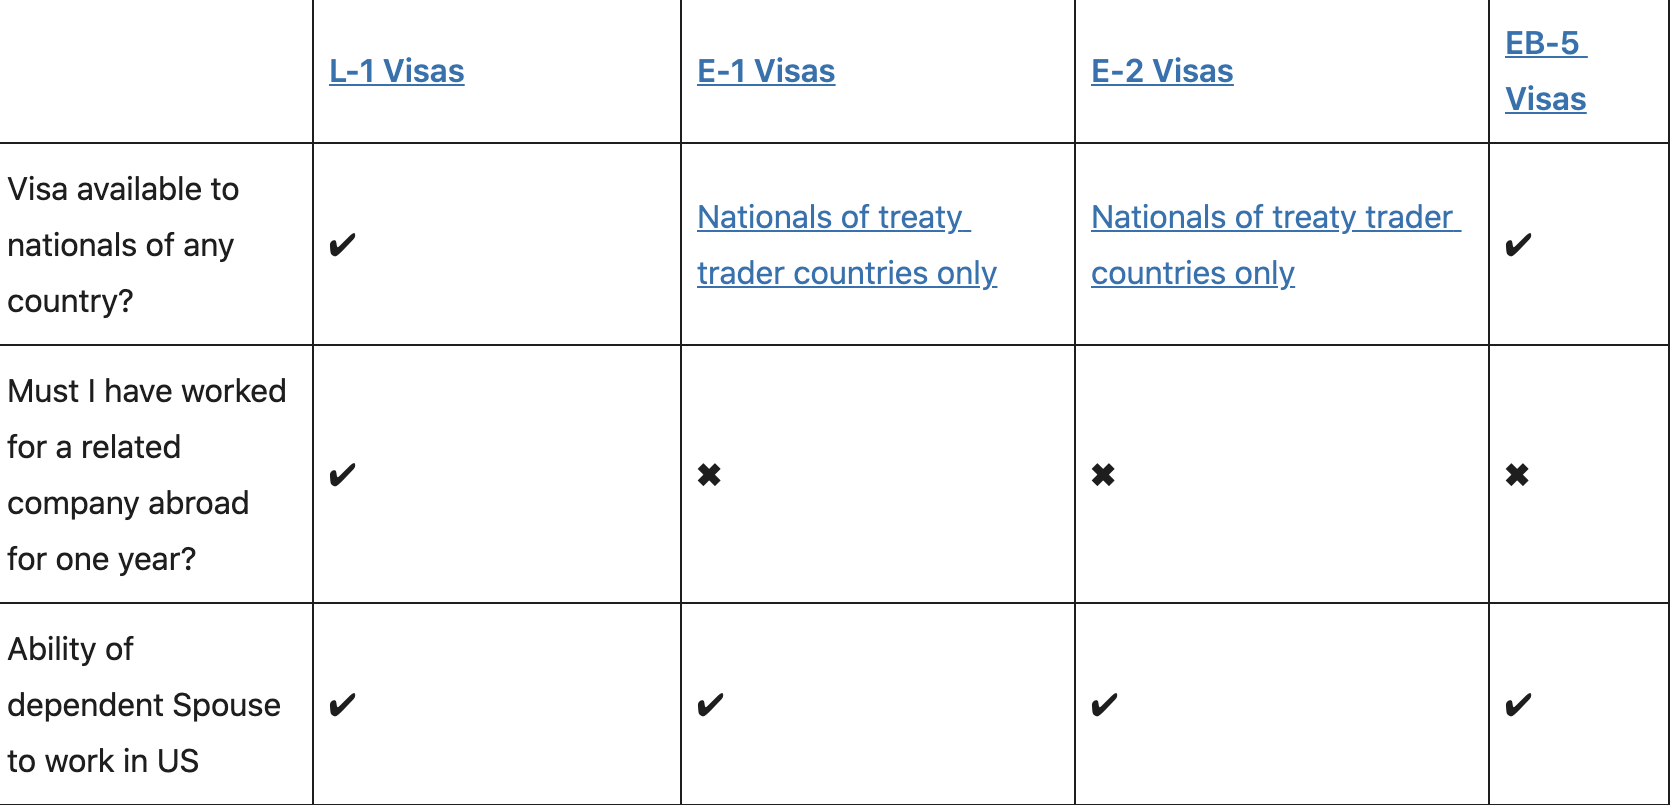 EB-3: MEMBER STATES NOT IN THE DONALD TRUMP ORDER: AMERICA FIRST - SG VISA